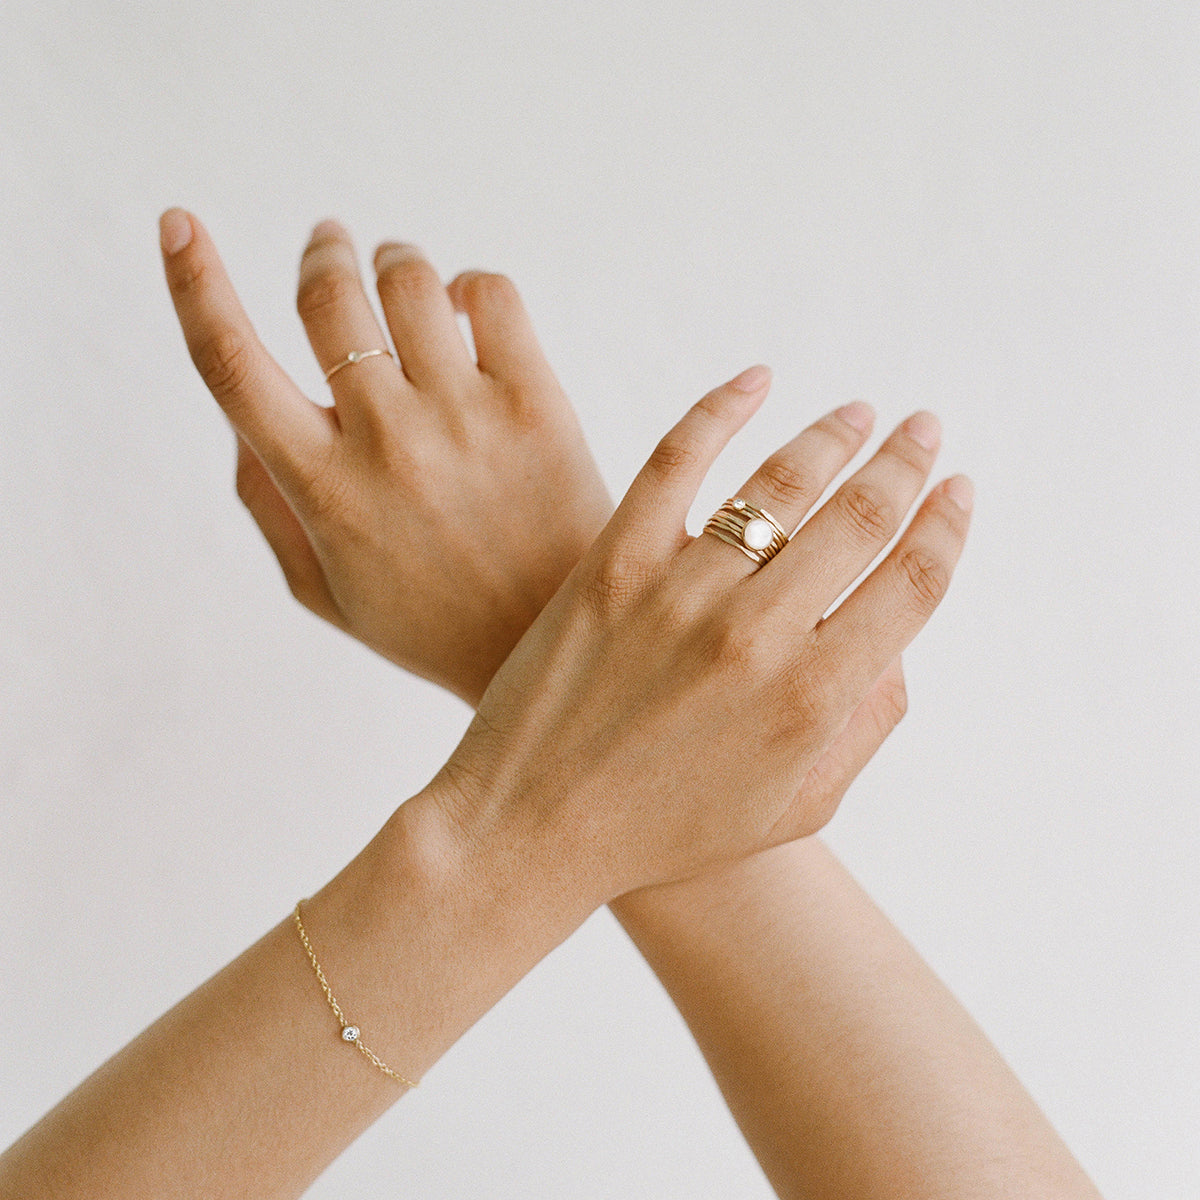 Modern 14k gold stacking rings for everyday